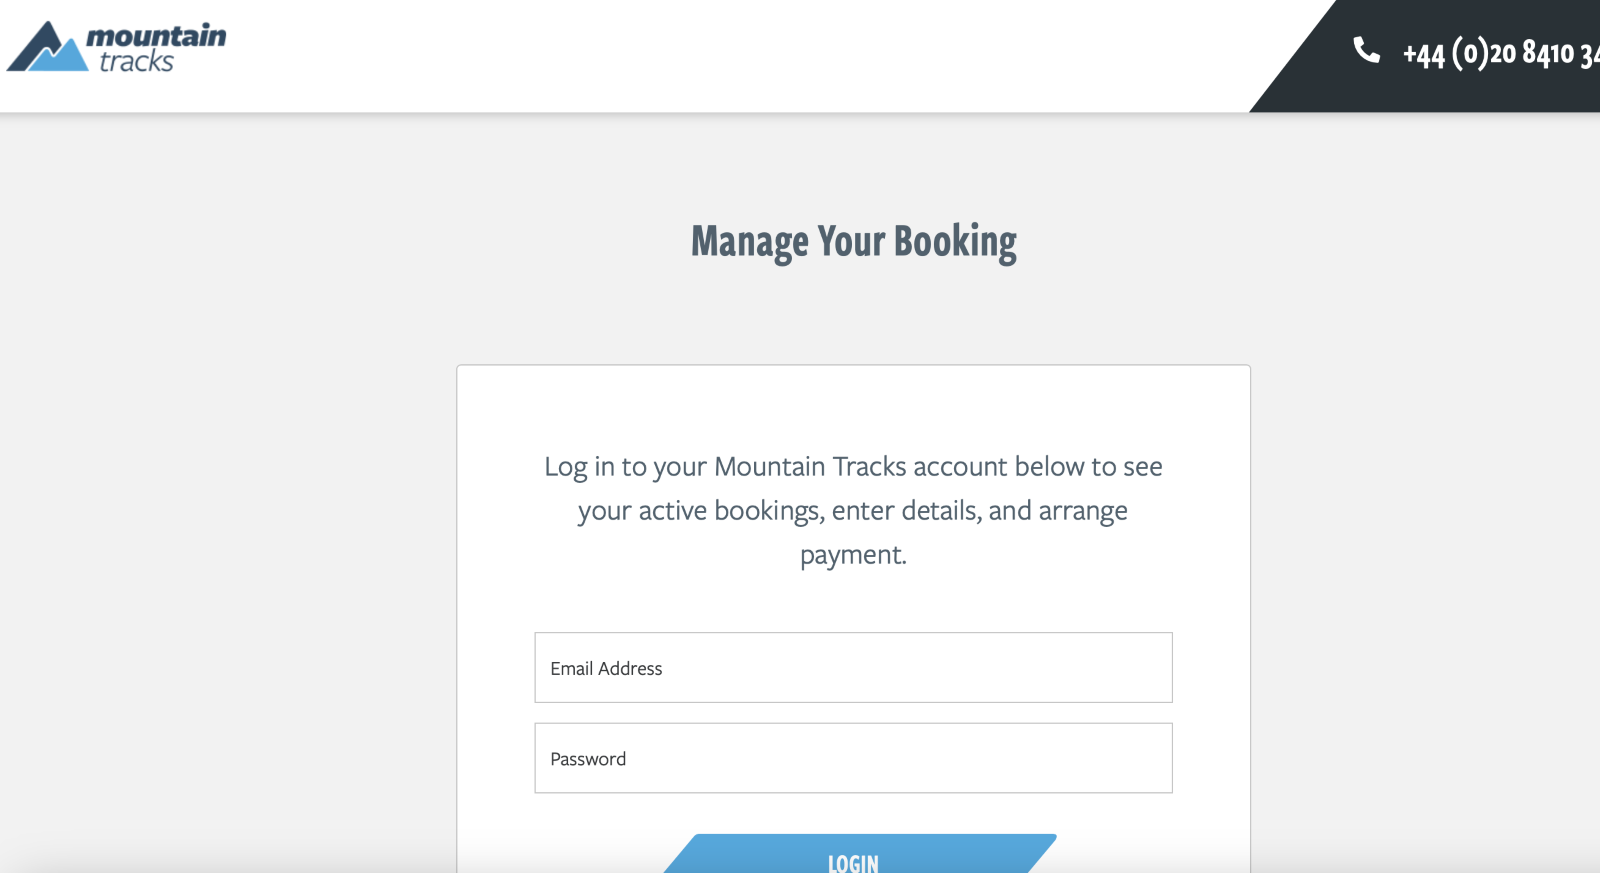 A screenshot from the Mountain Tracks website showing a customer portal login page.